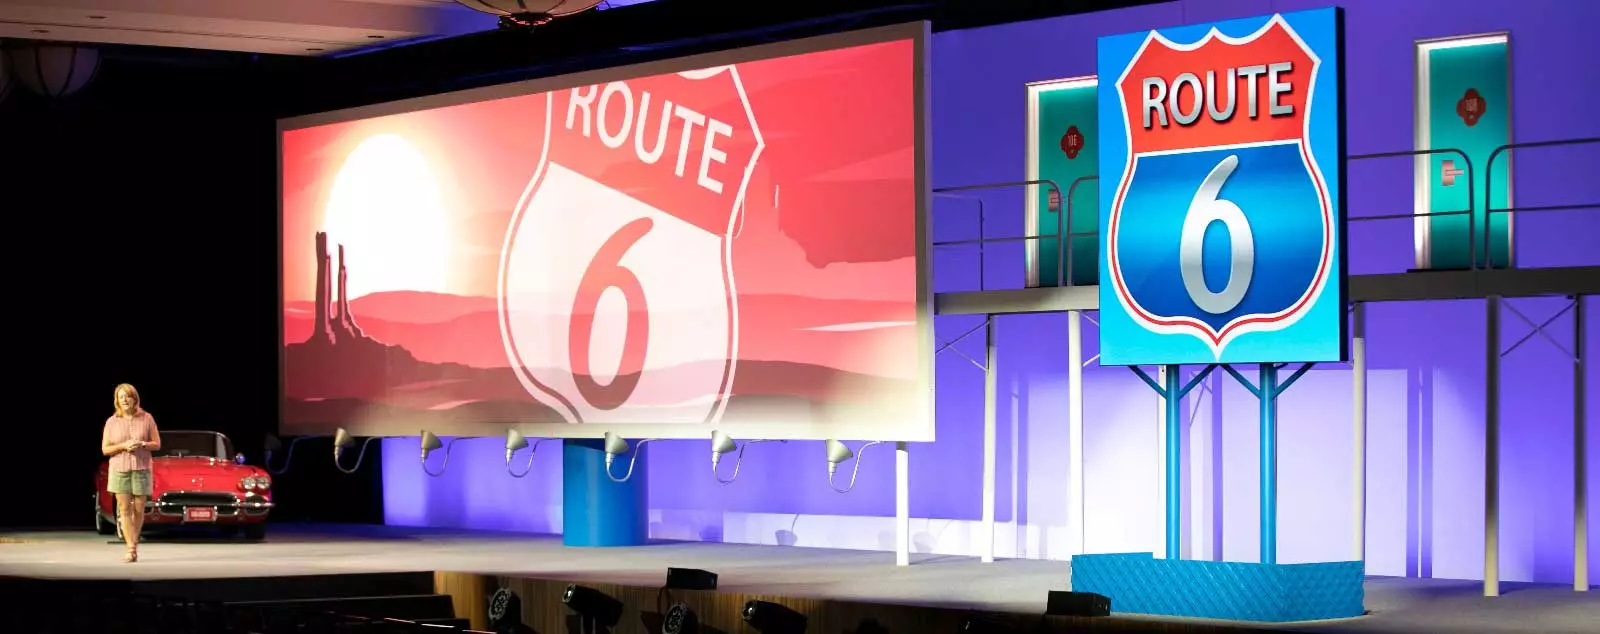 Route 6 backdrops on stage with woman for G6 event